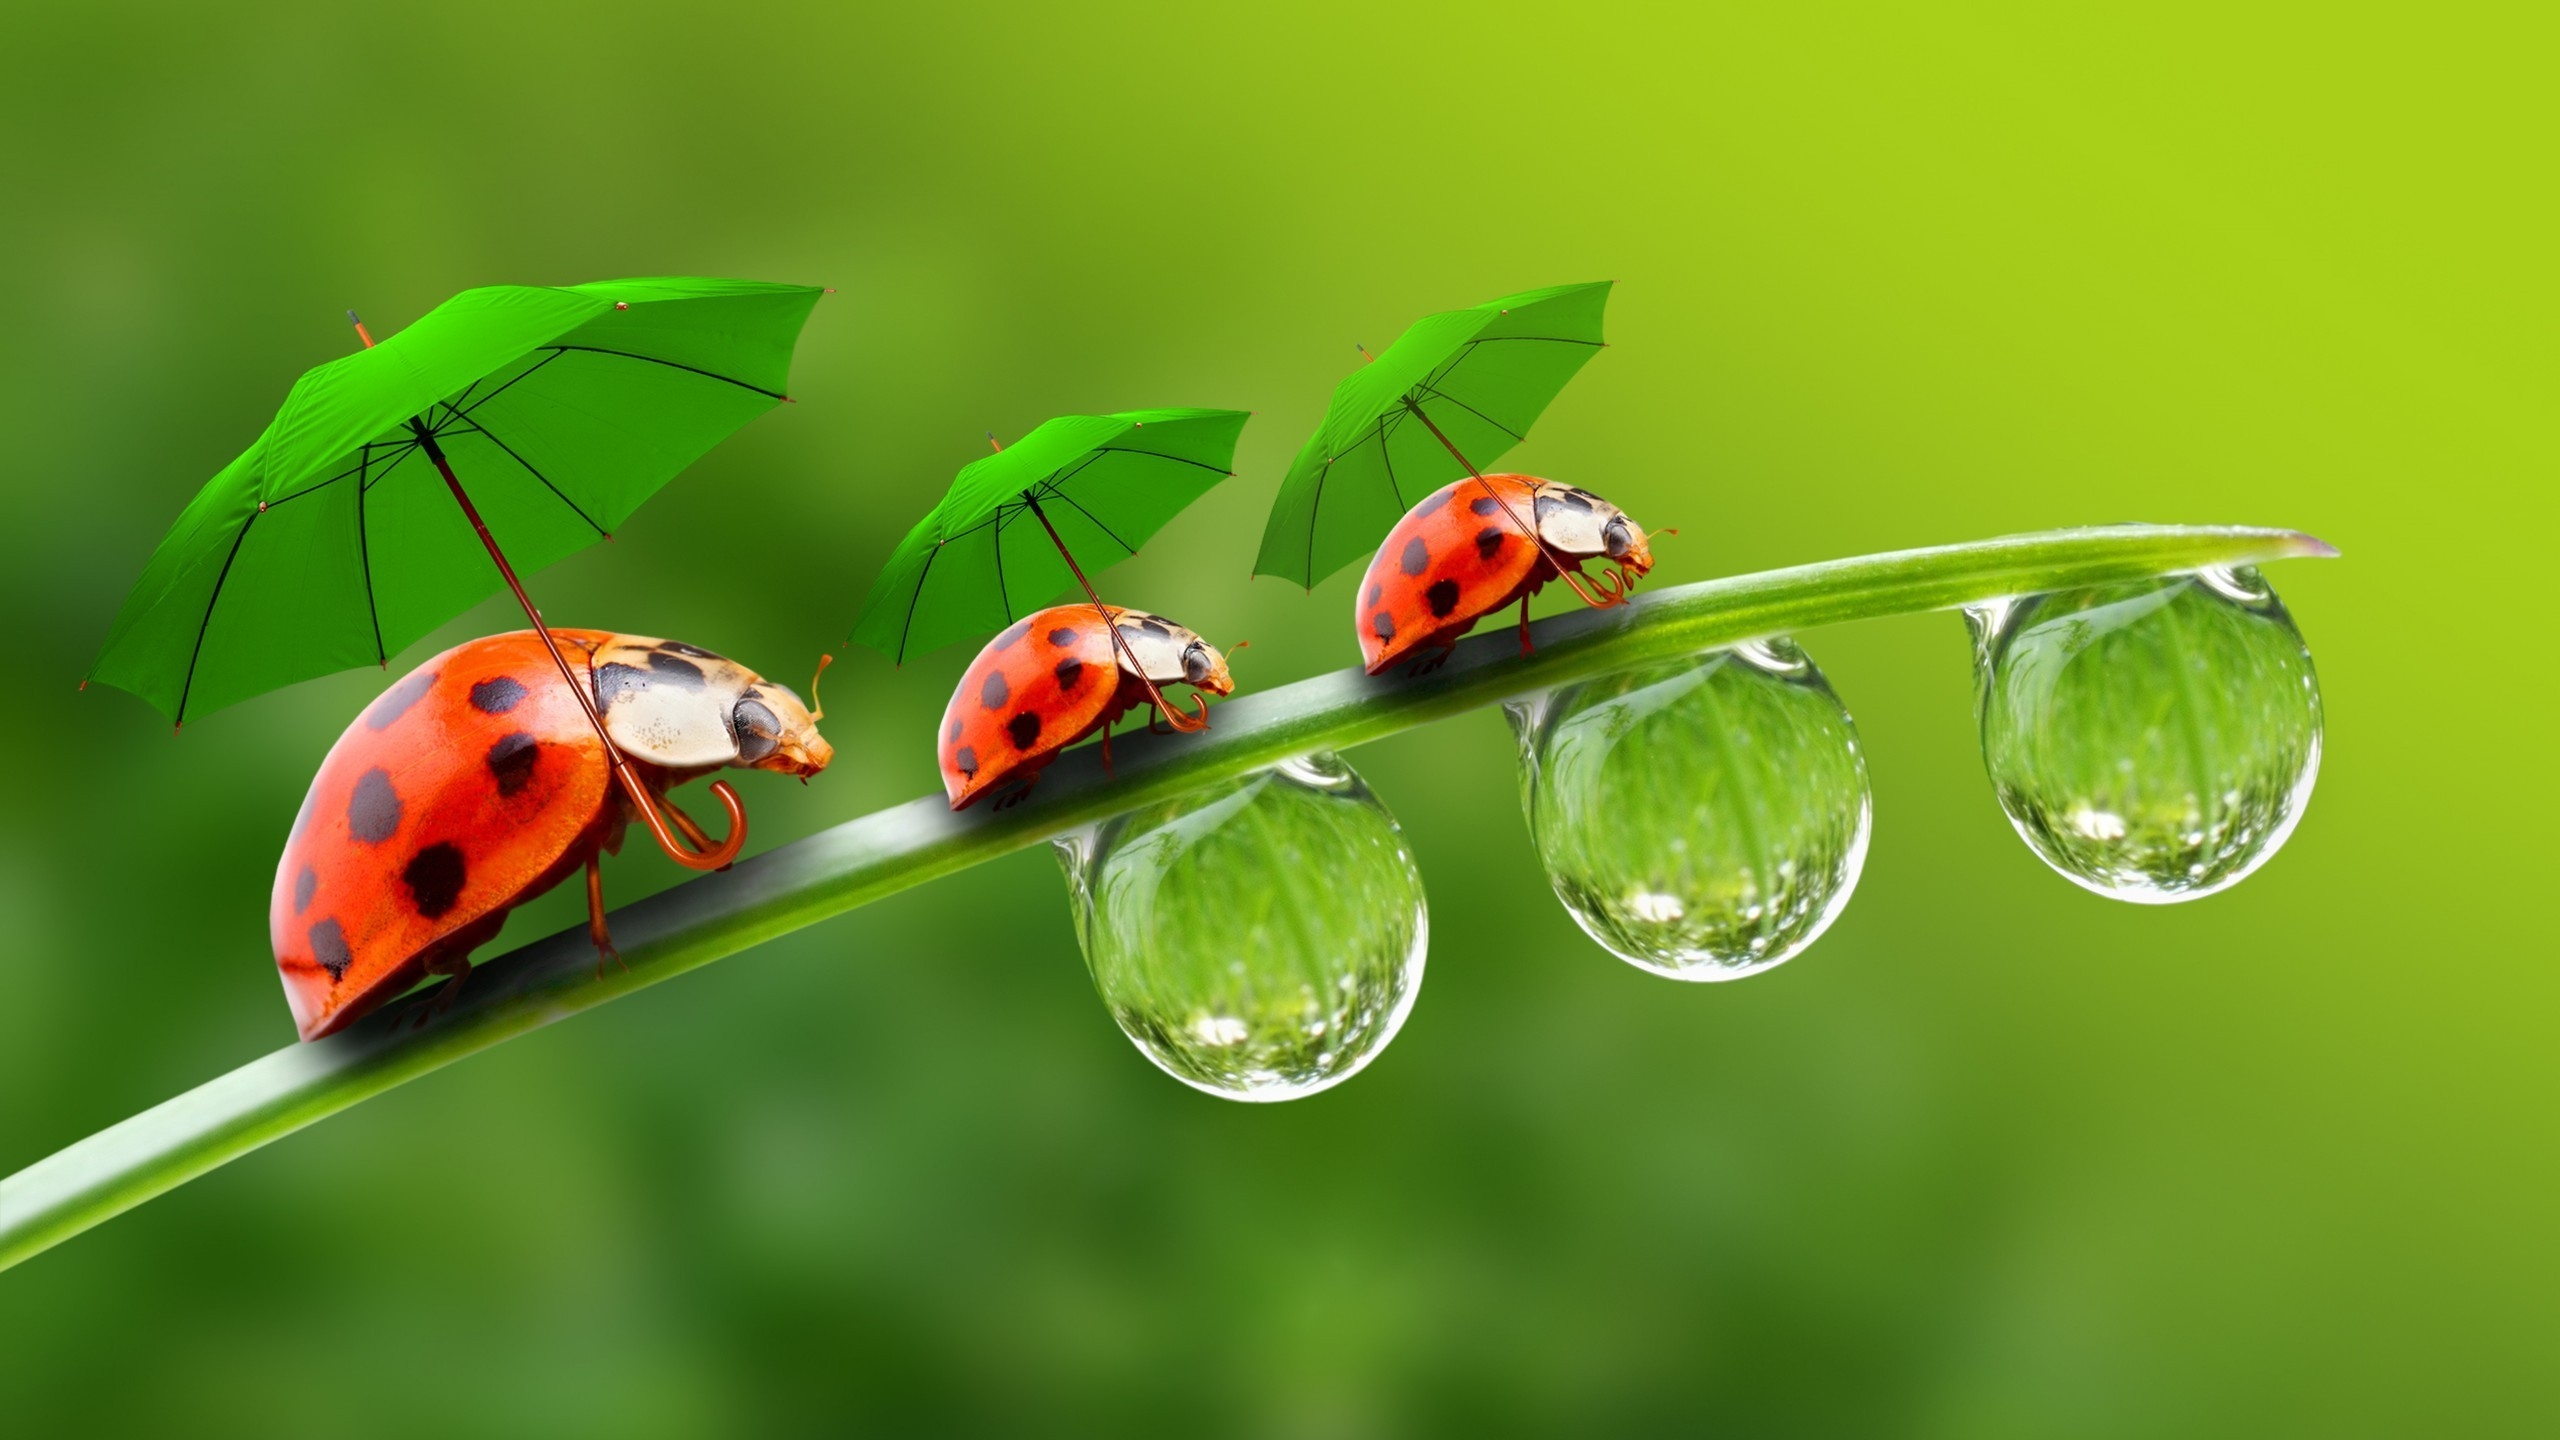 Ladybugs with Umbrellas for 2560x1440 HDTV resolution